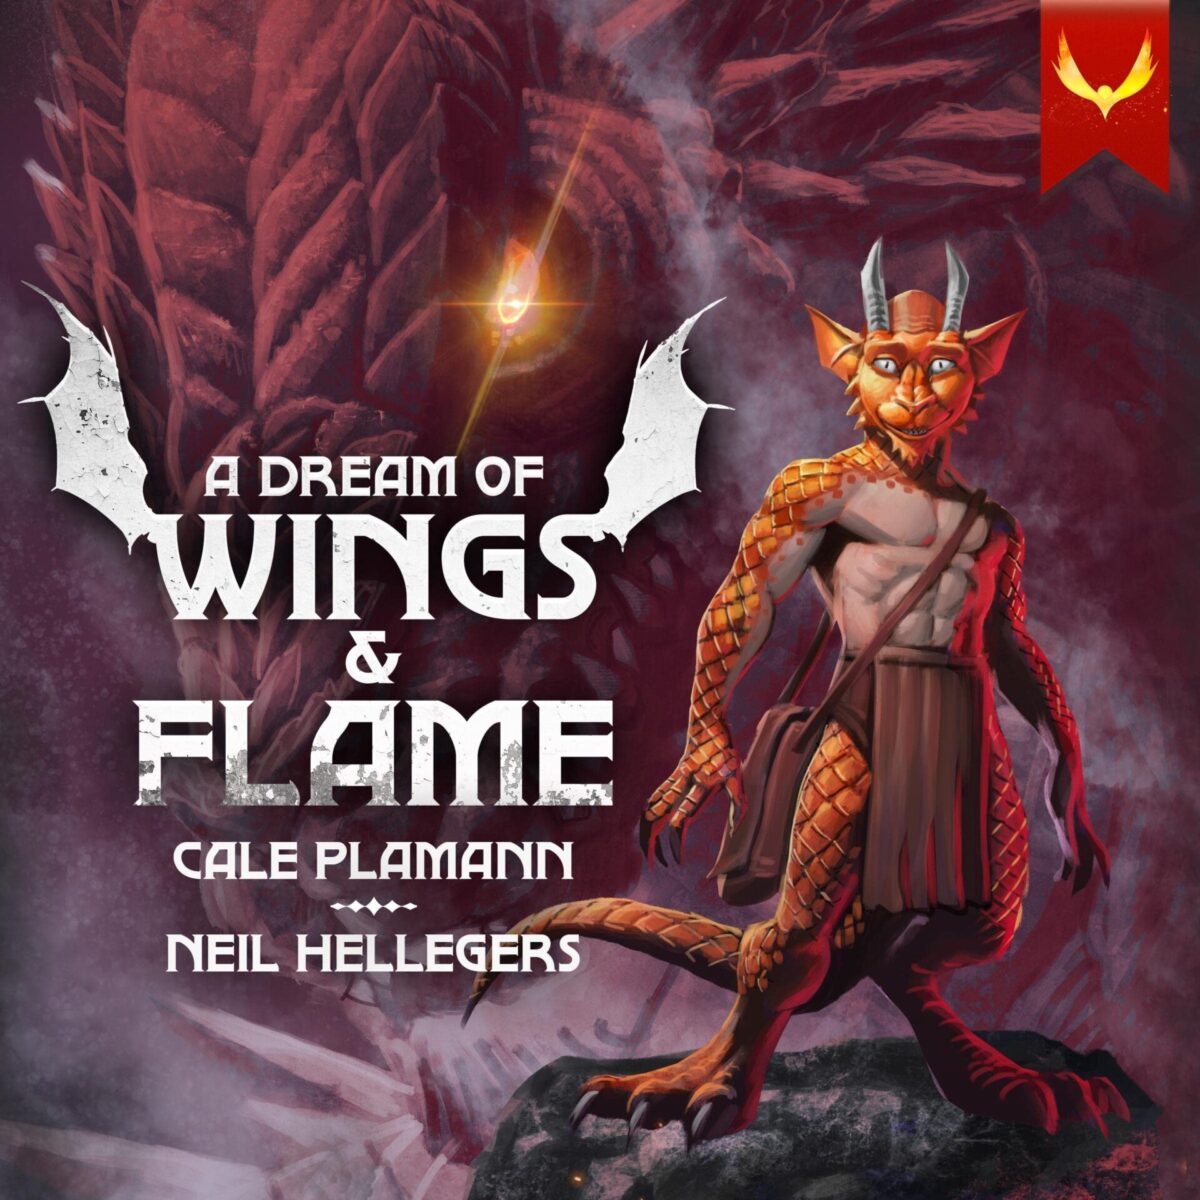 A Dream of Wings & Flame